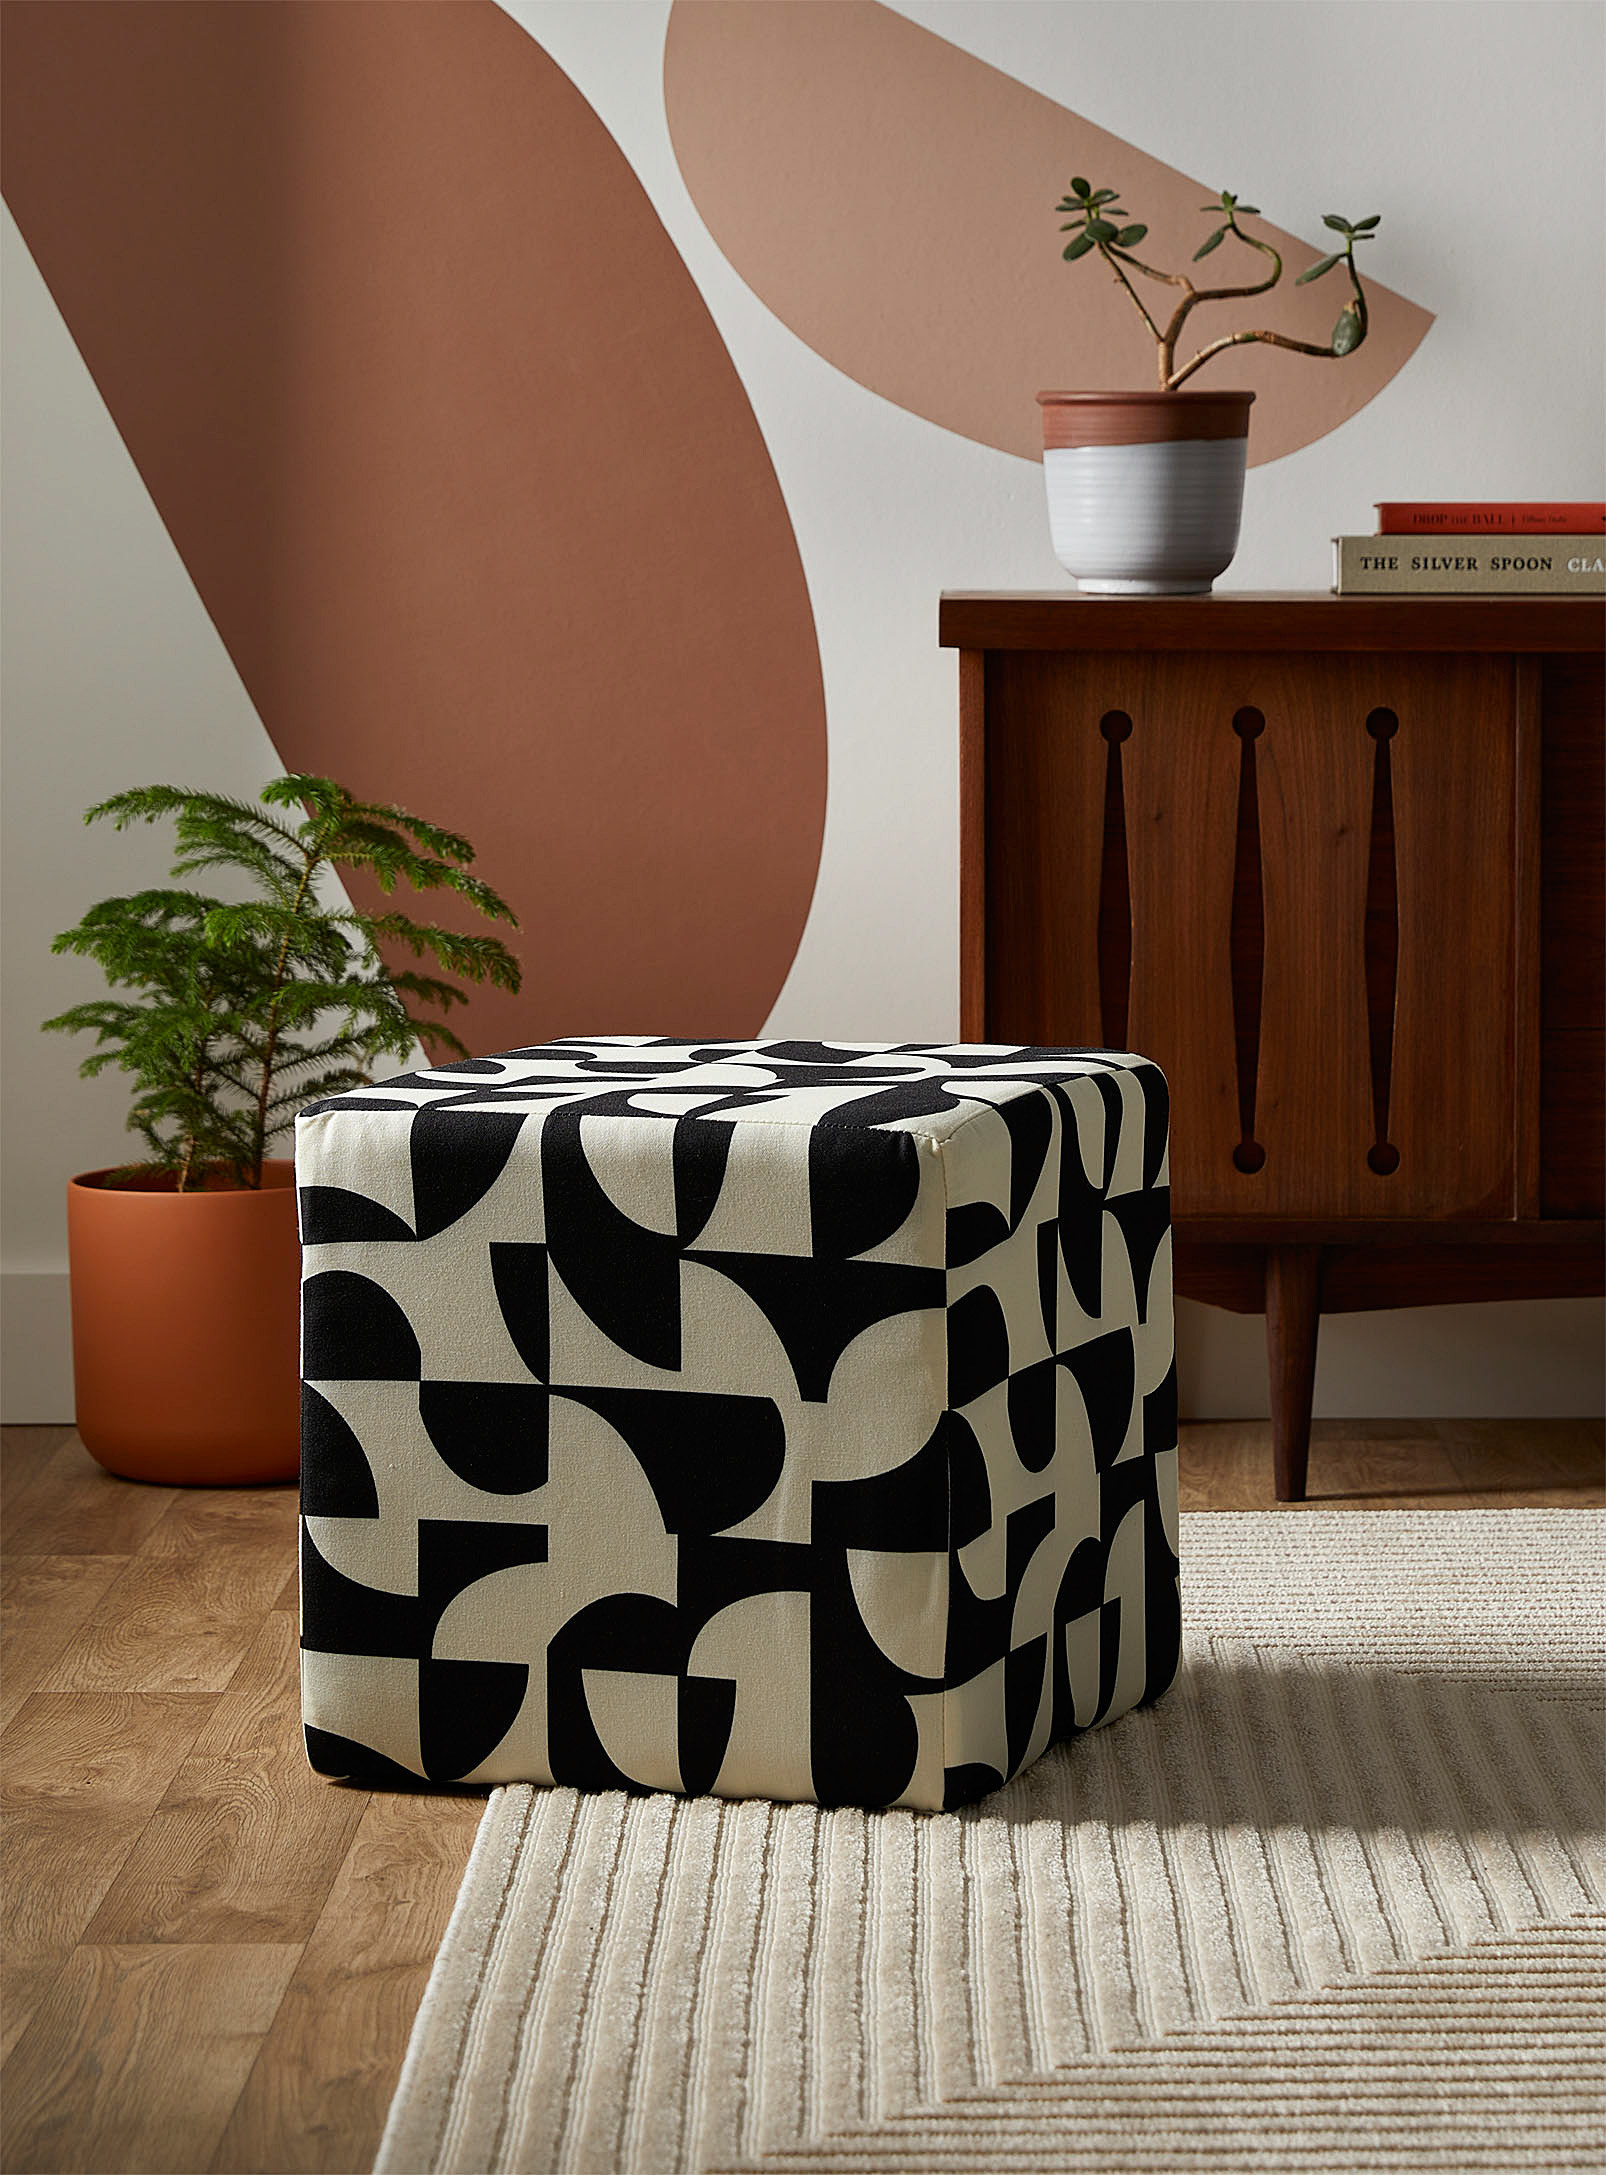 A small cube-shaped ottoman on a rug